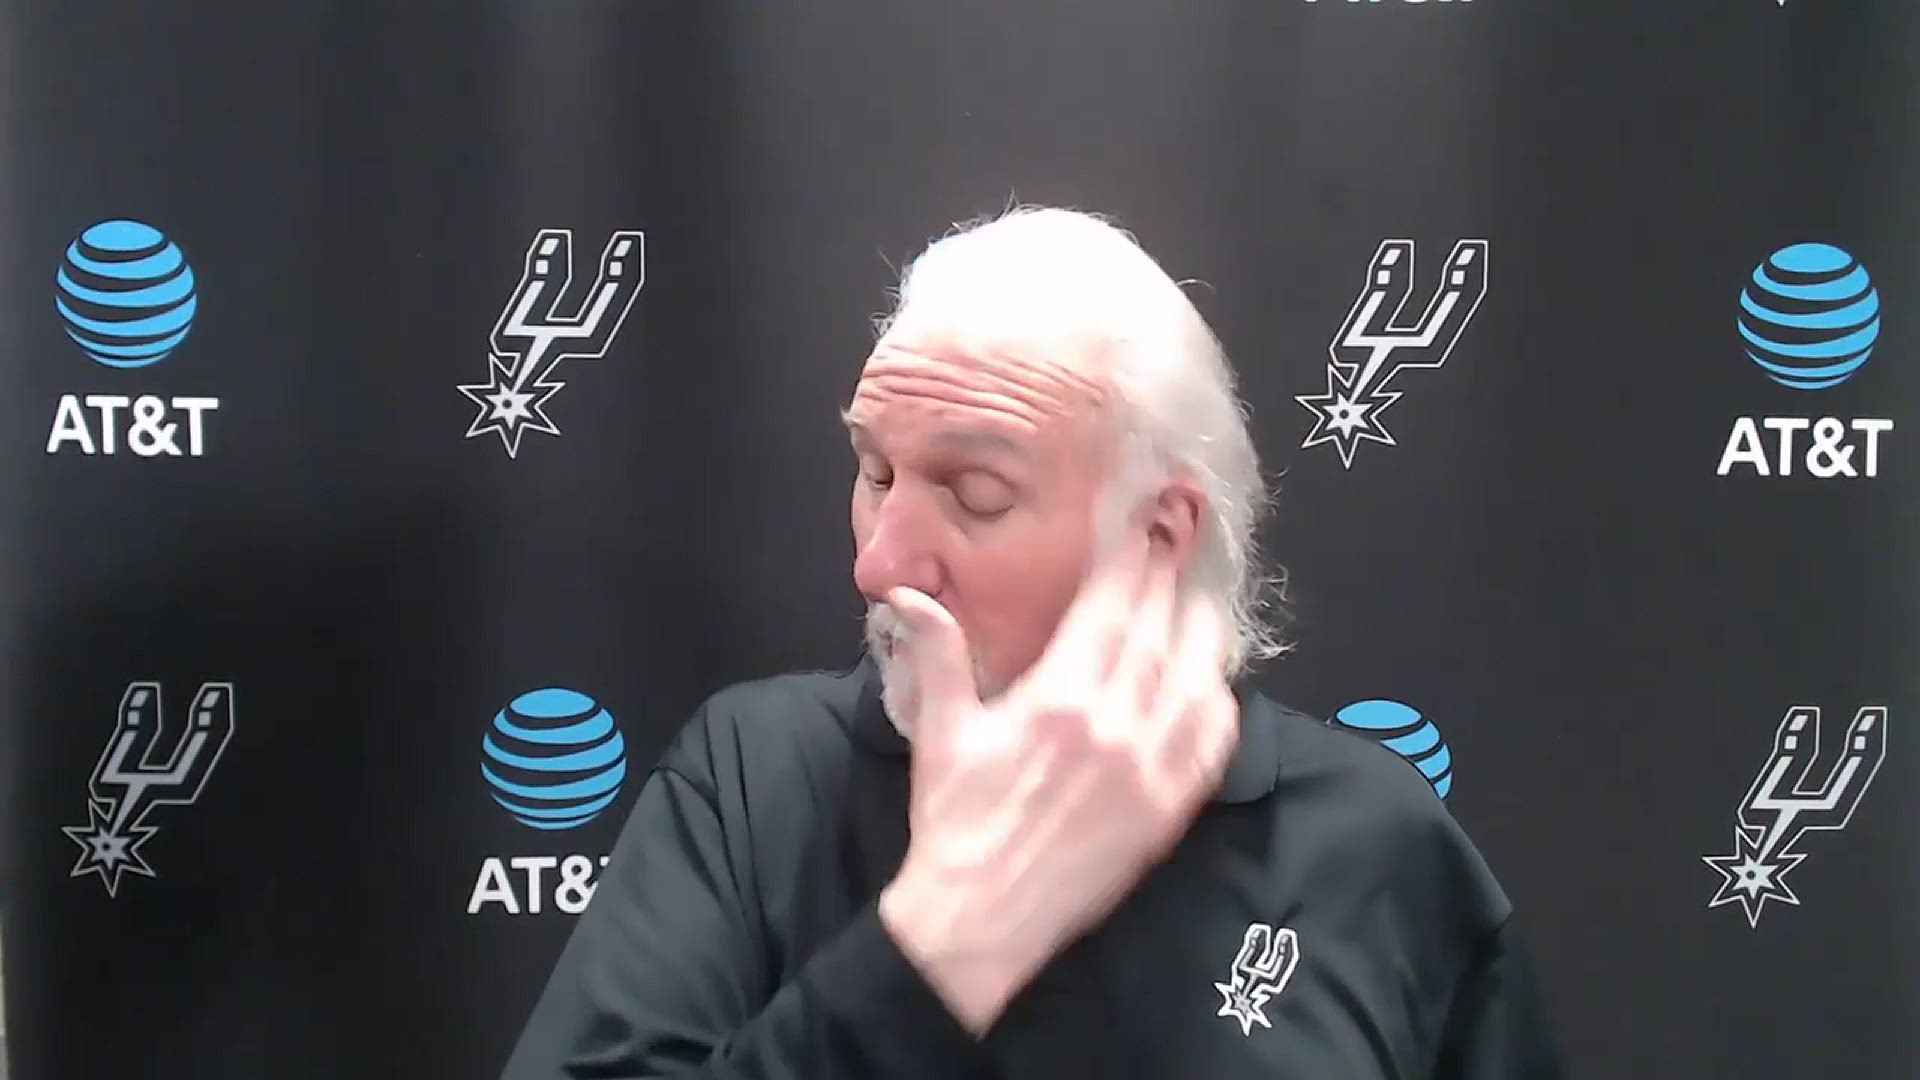 Pop praised the pair of Derrick White and Dejounte Murray, who combined for 51 points, and said Lonnie Walker IV provided two-way impact off the bench.